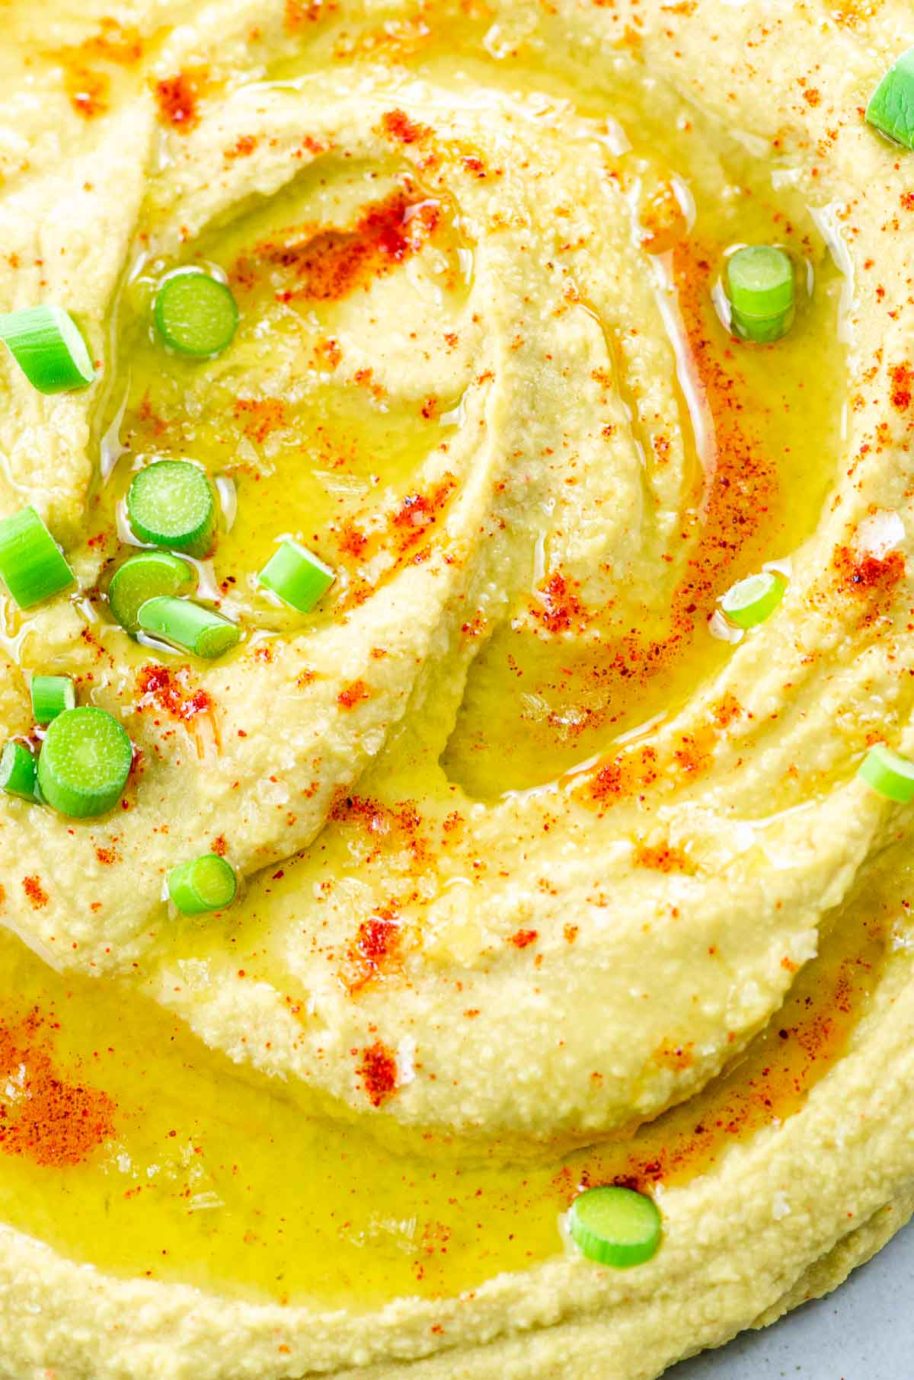 garlic scape hummus with no tahini on a plate